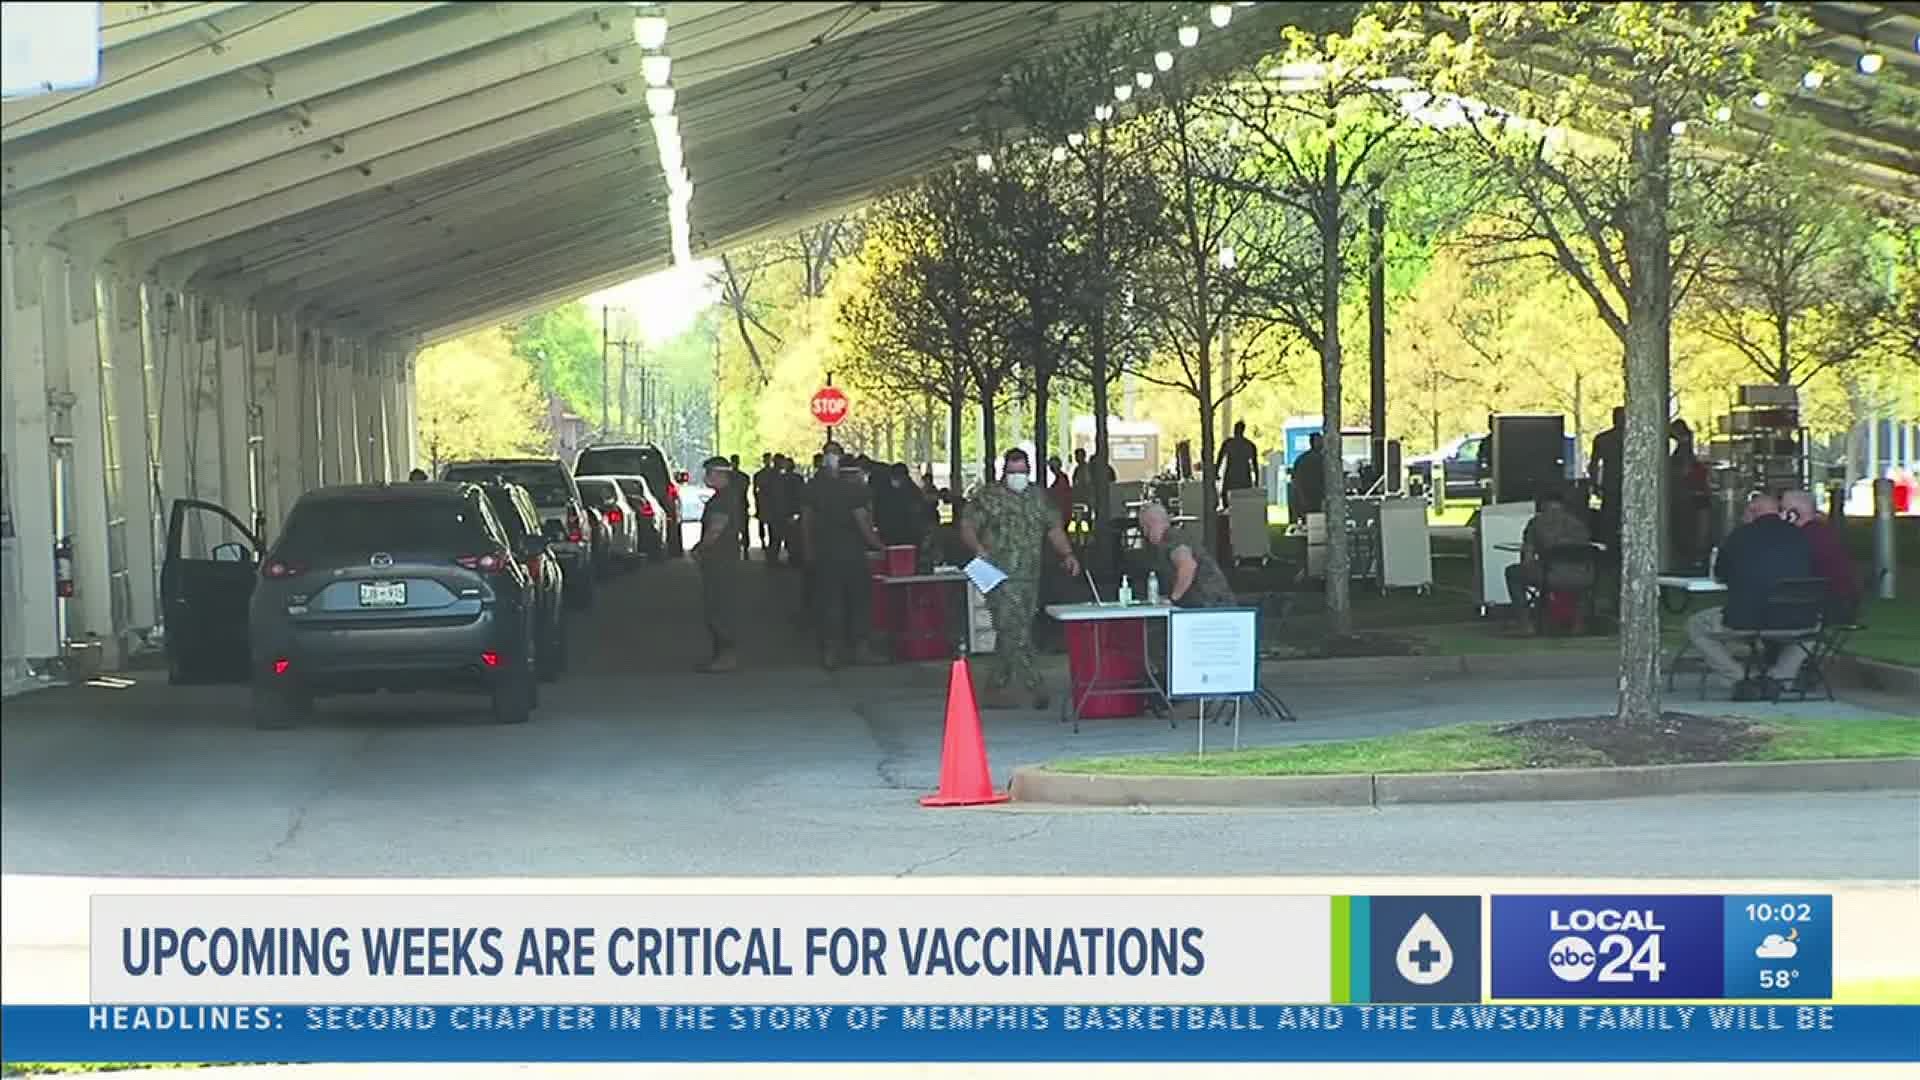 City leaders said the next four weeks will be critical concerning vaccines.